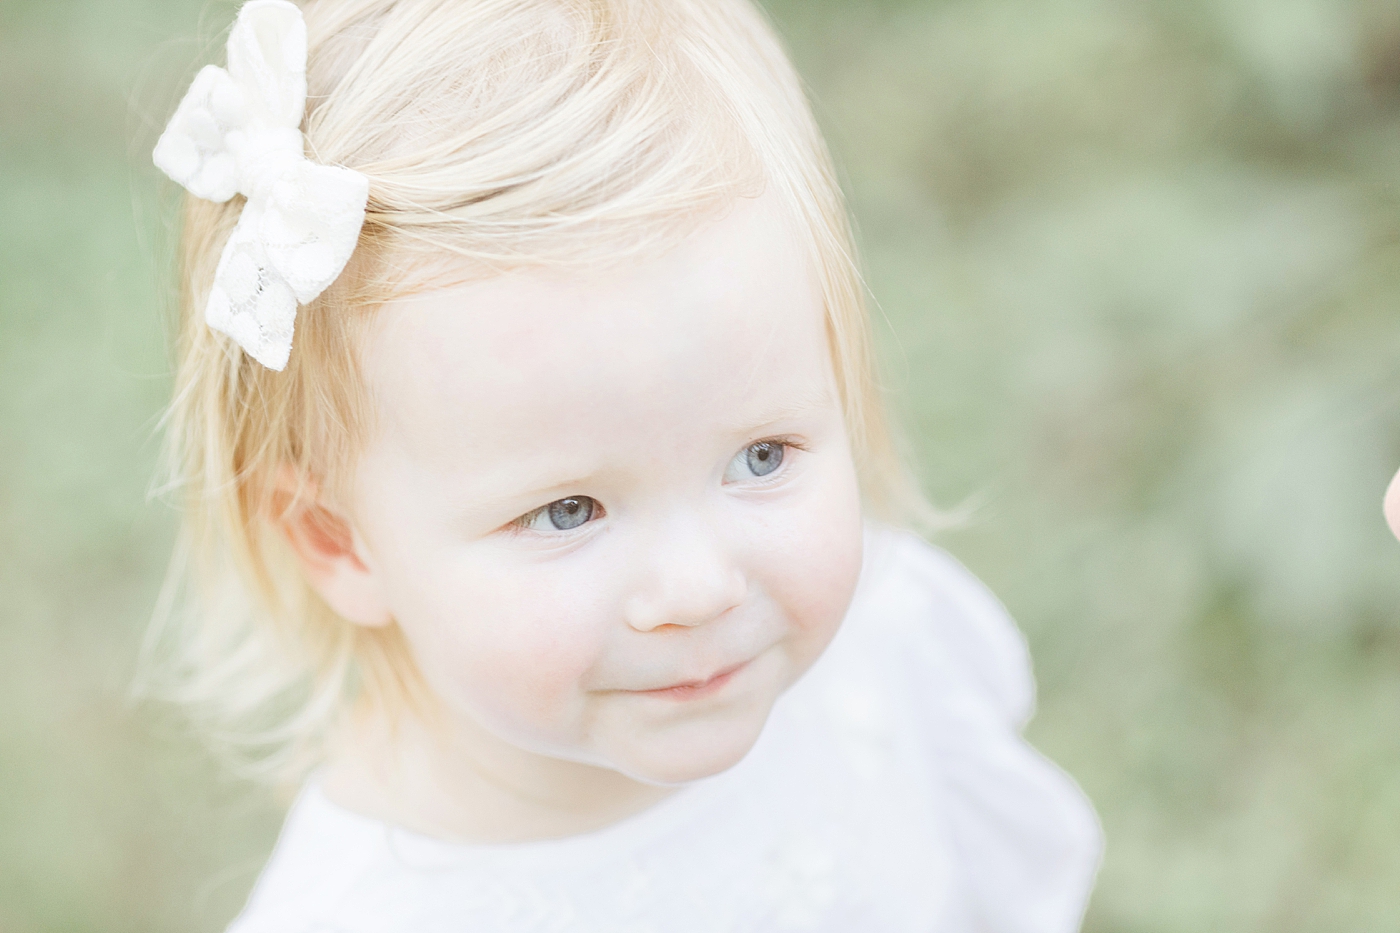 Children's portrait of toddler-aged girl. Photo by Fresh Light Photography.